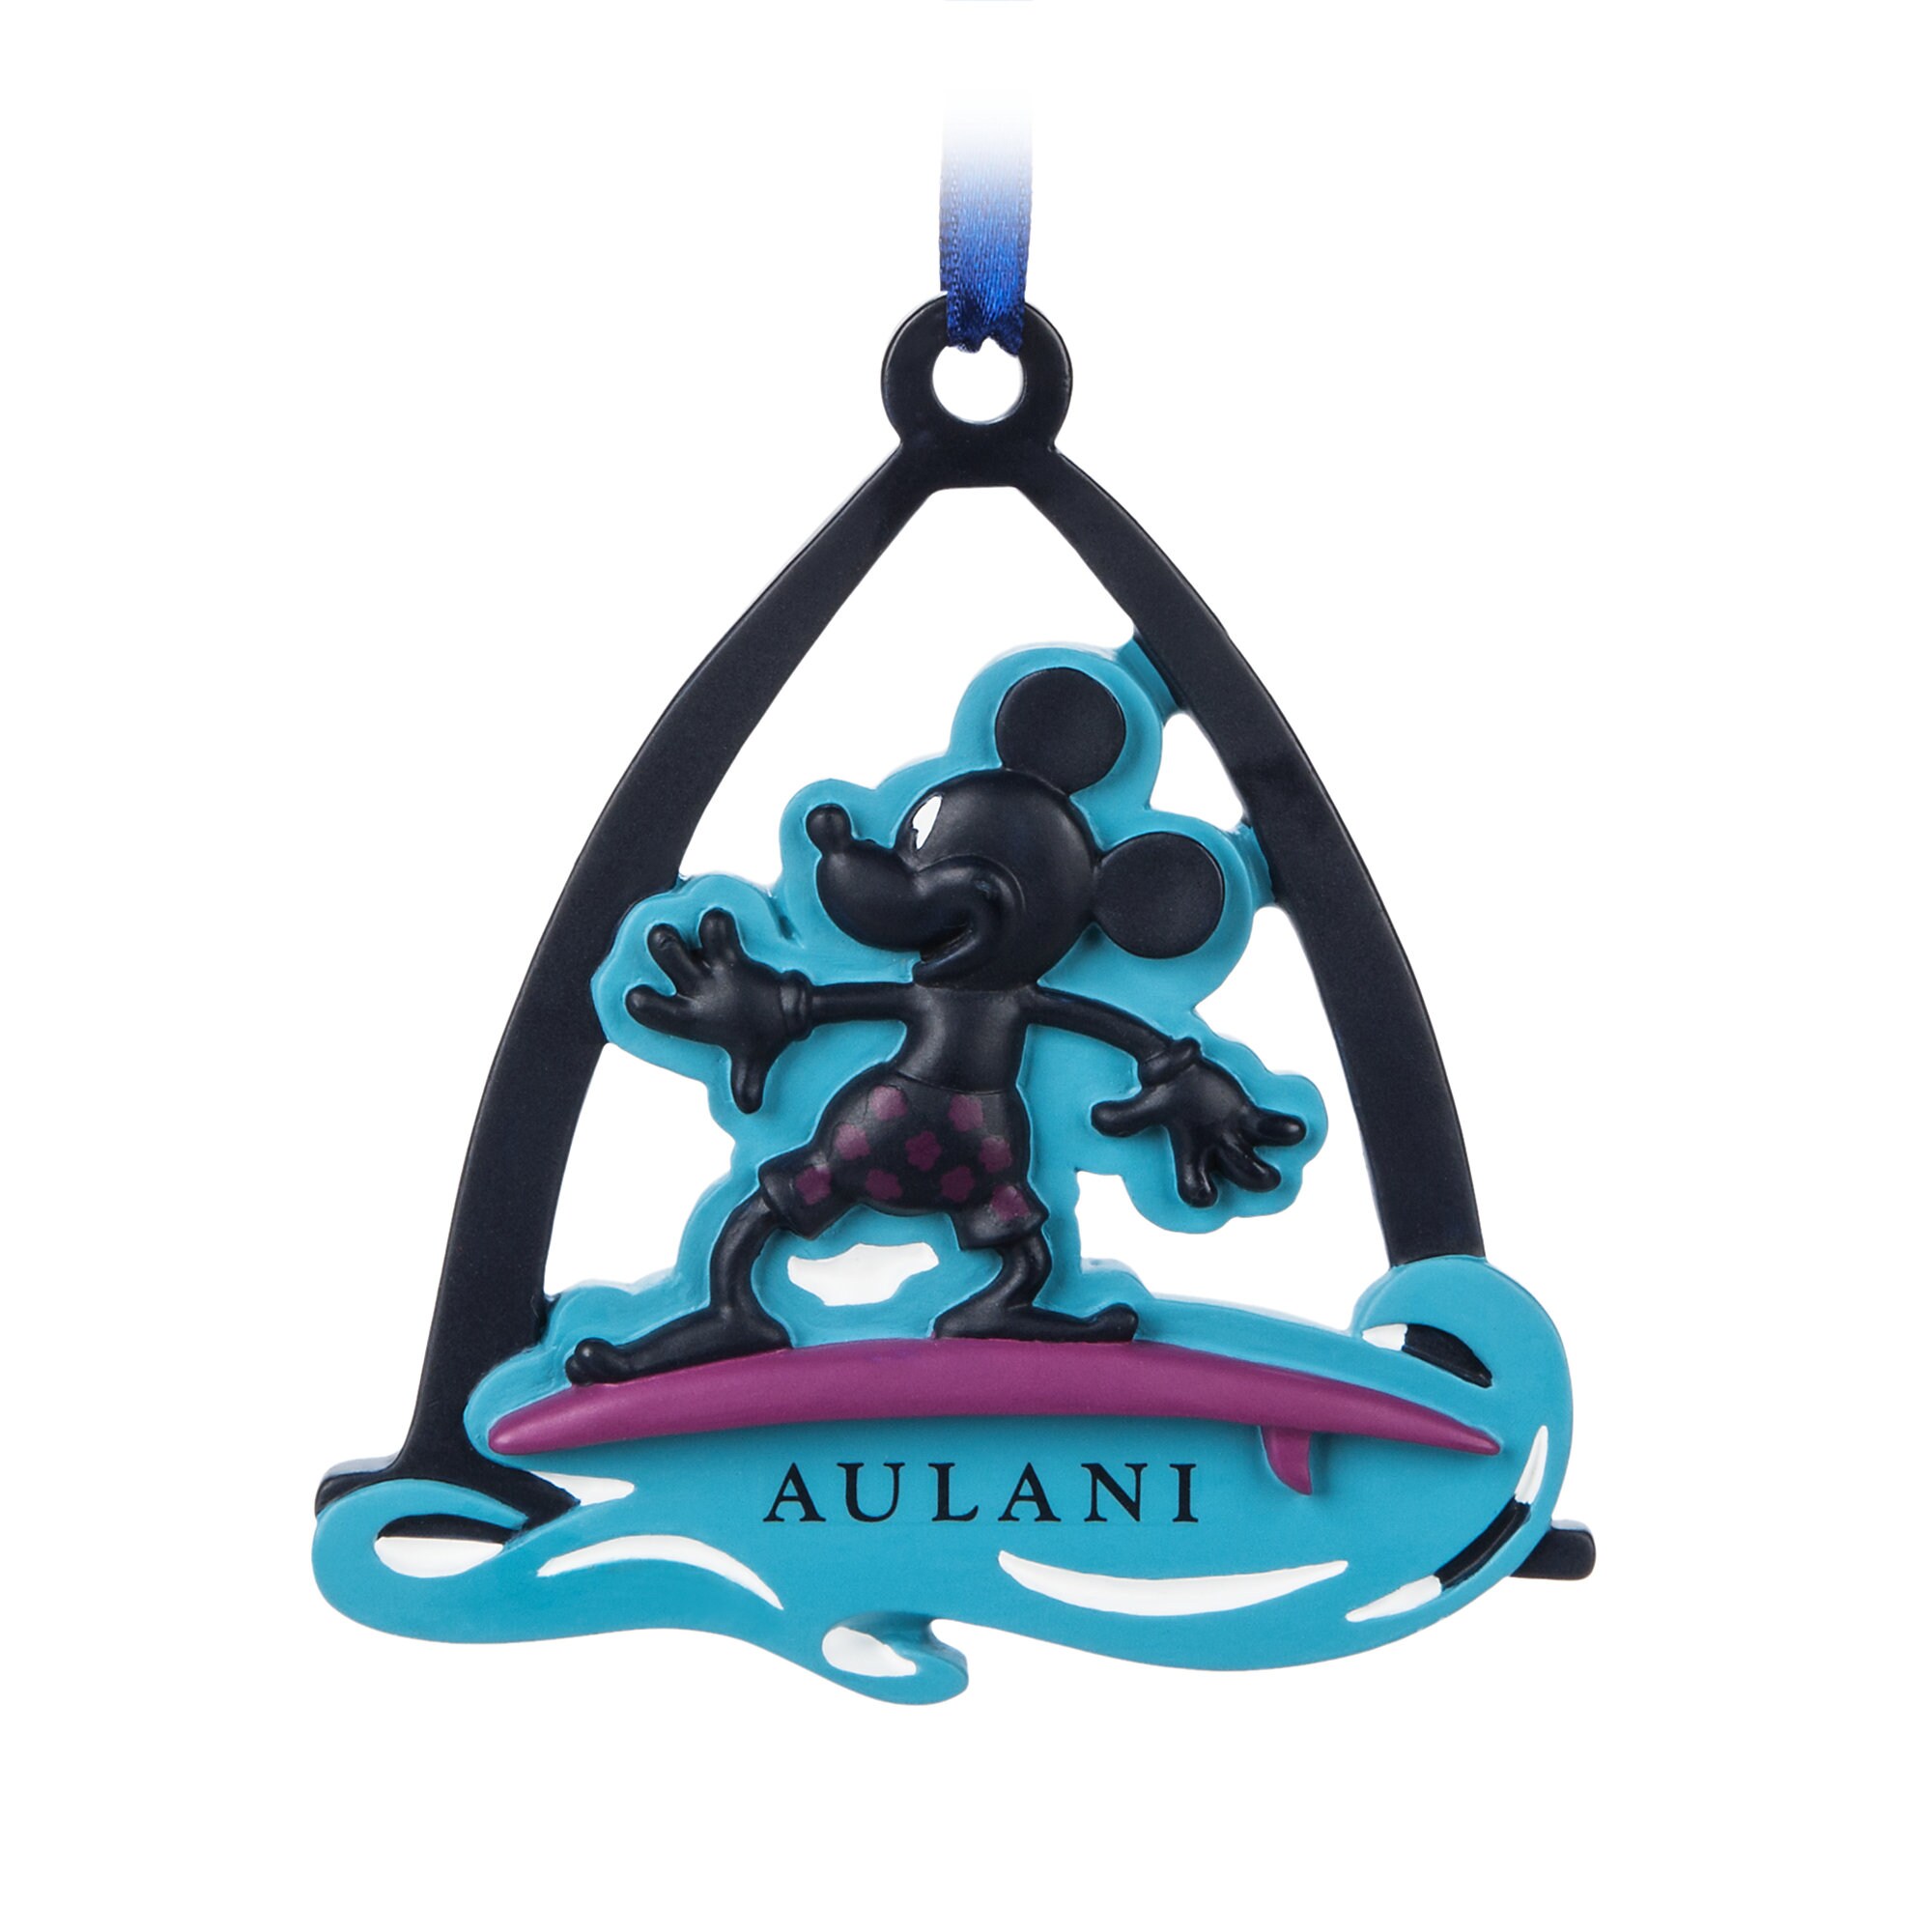 Mickey Mouse Ornament Aulani, A Disney Resort & Spa is here now Dis